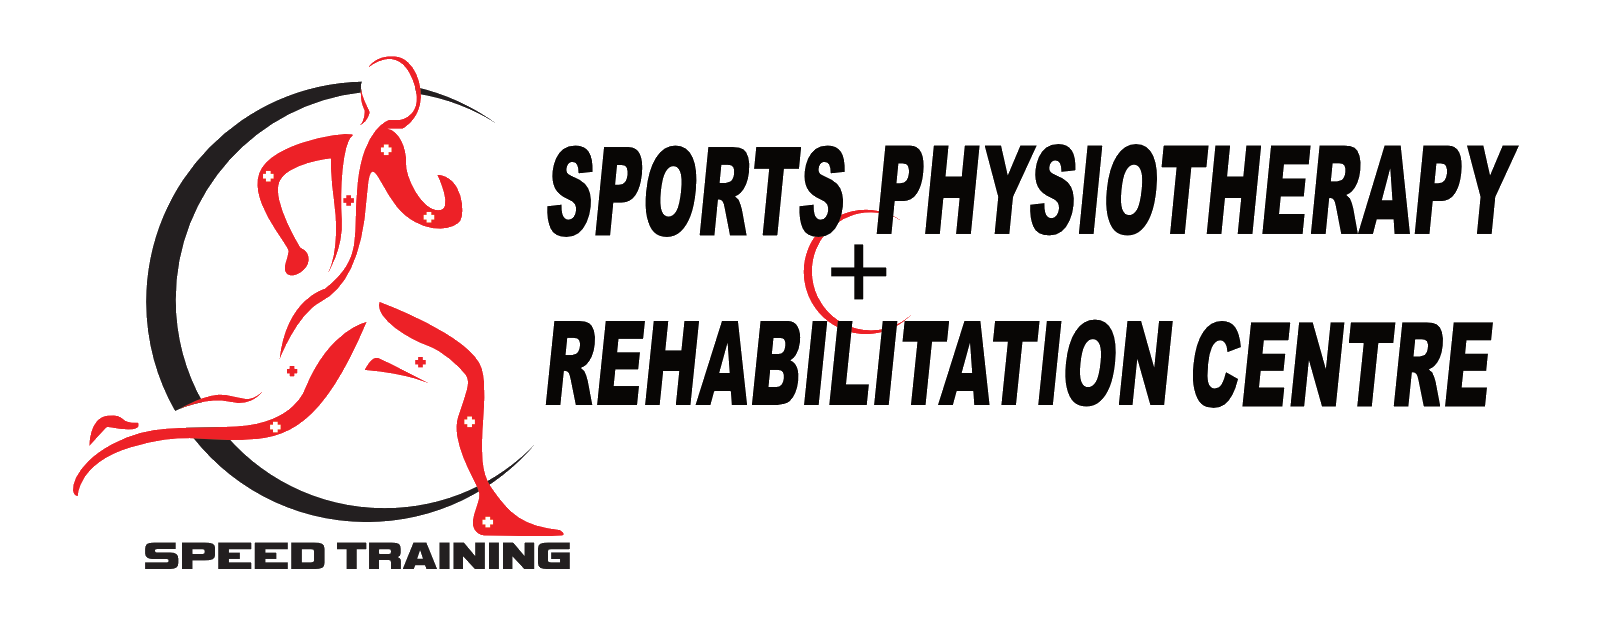 Benefits of Sports Physiotherapy - Physio Lounge